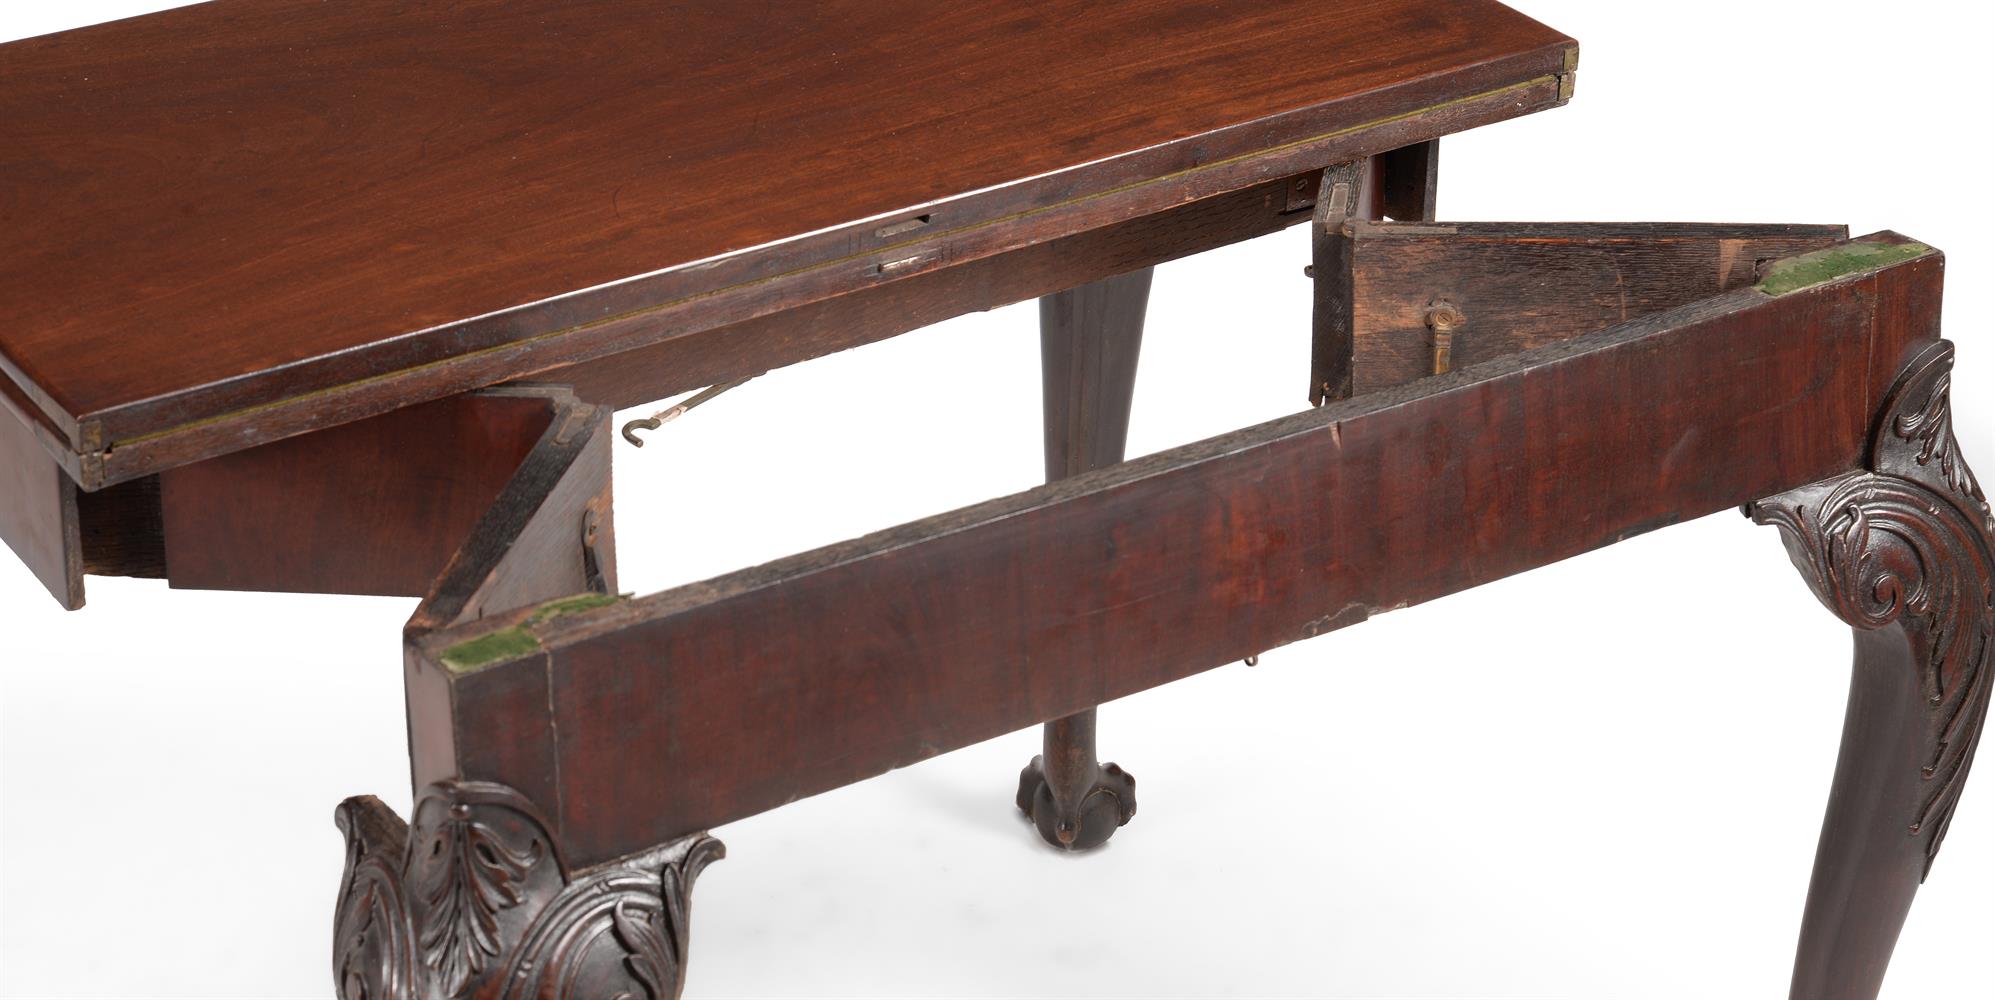 A PAIR OF GEORGE II MAHOGANY CONCERTINA ACTION FOLDING CARD TABLES PROBABLY IRISH - Image 8 of 9